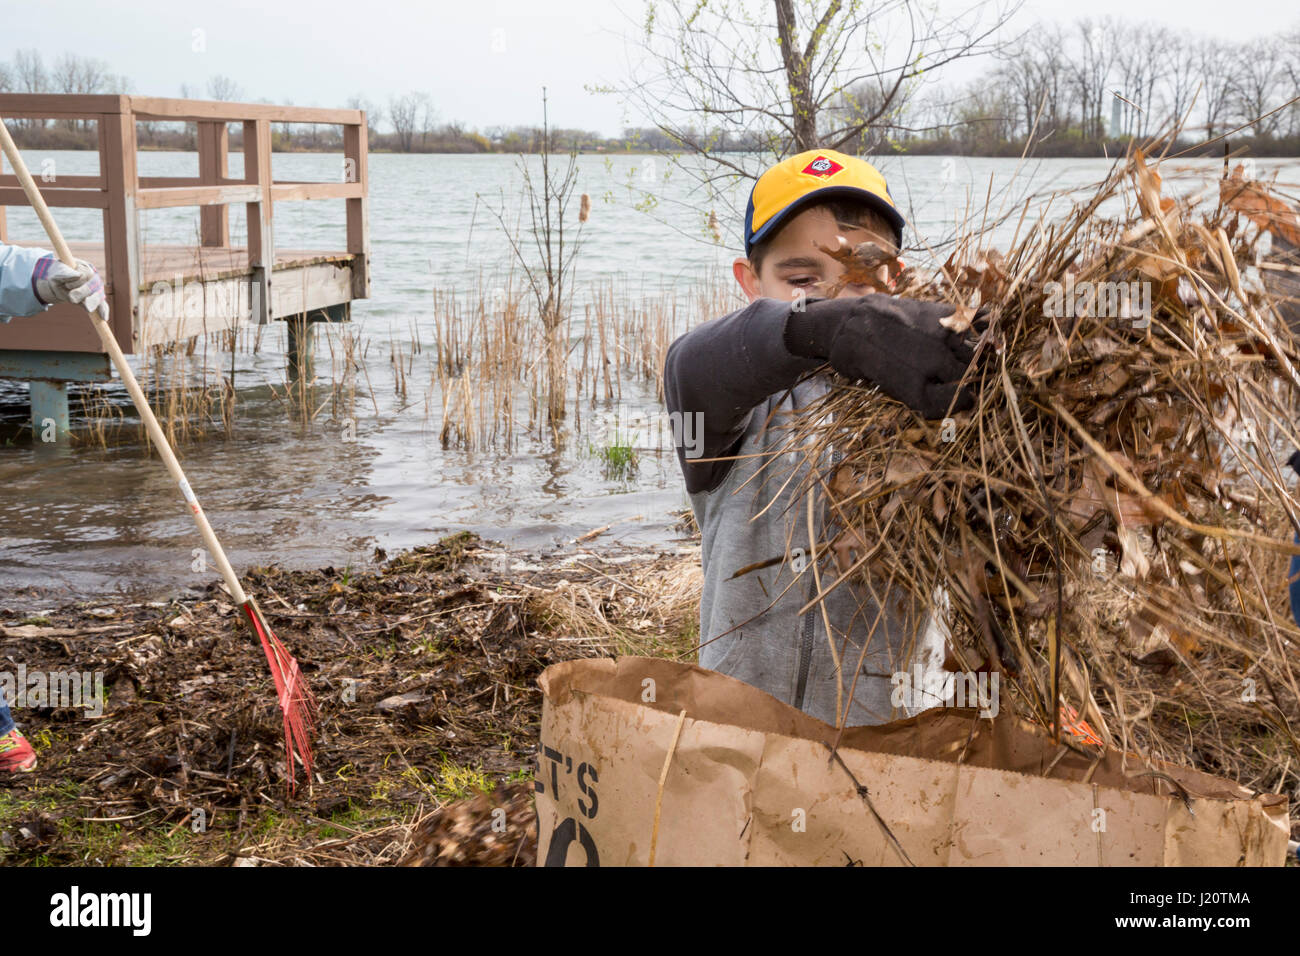 Detroit, Michigan - Volunteers from a Cub Scout pack help clean Belle Isle, a state park on an island in the Detroit River. Stock Photo